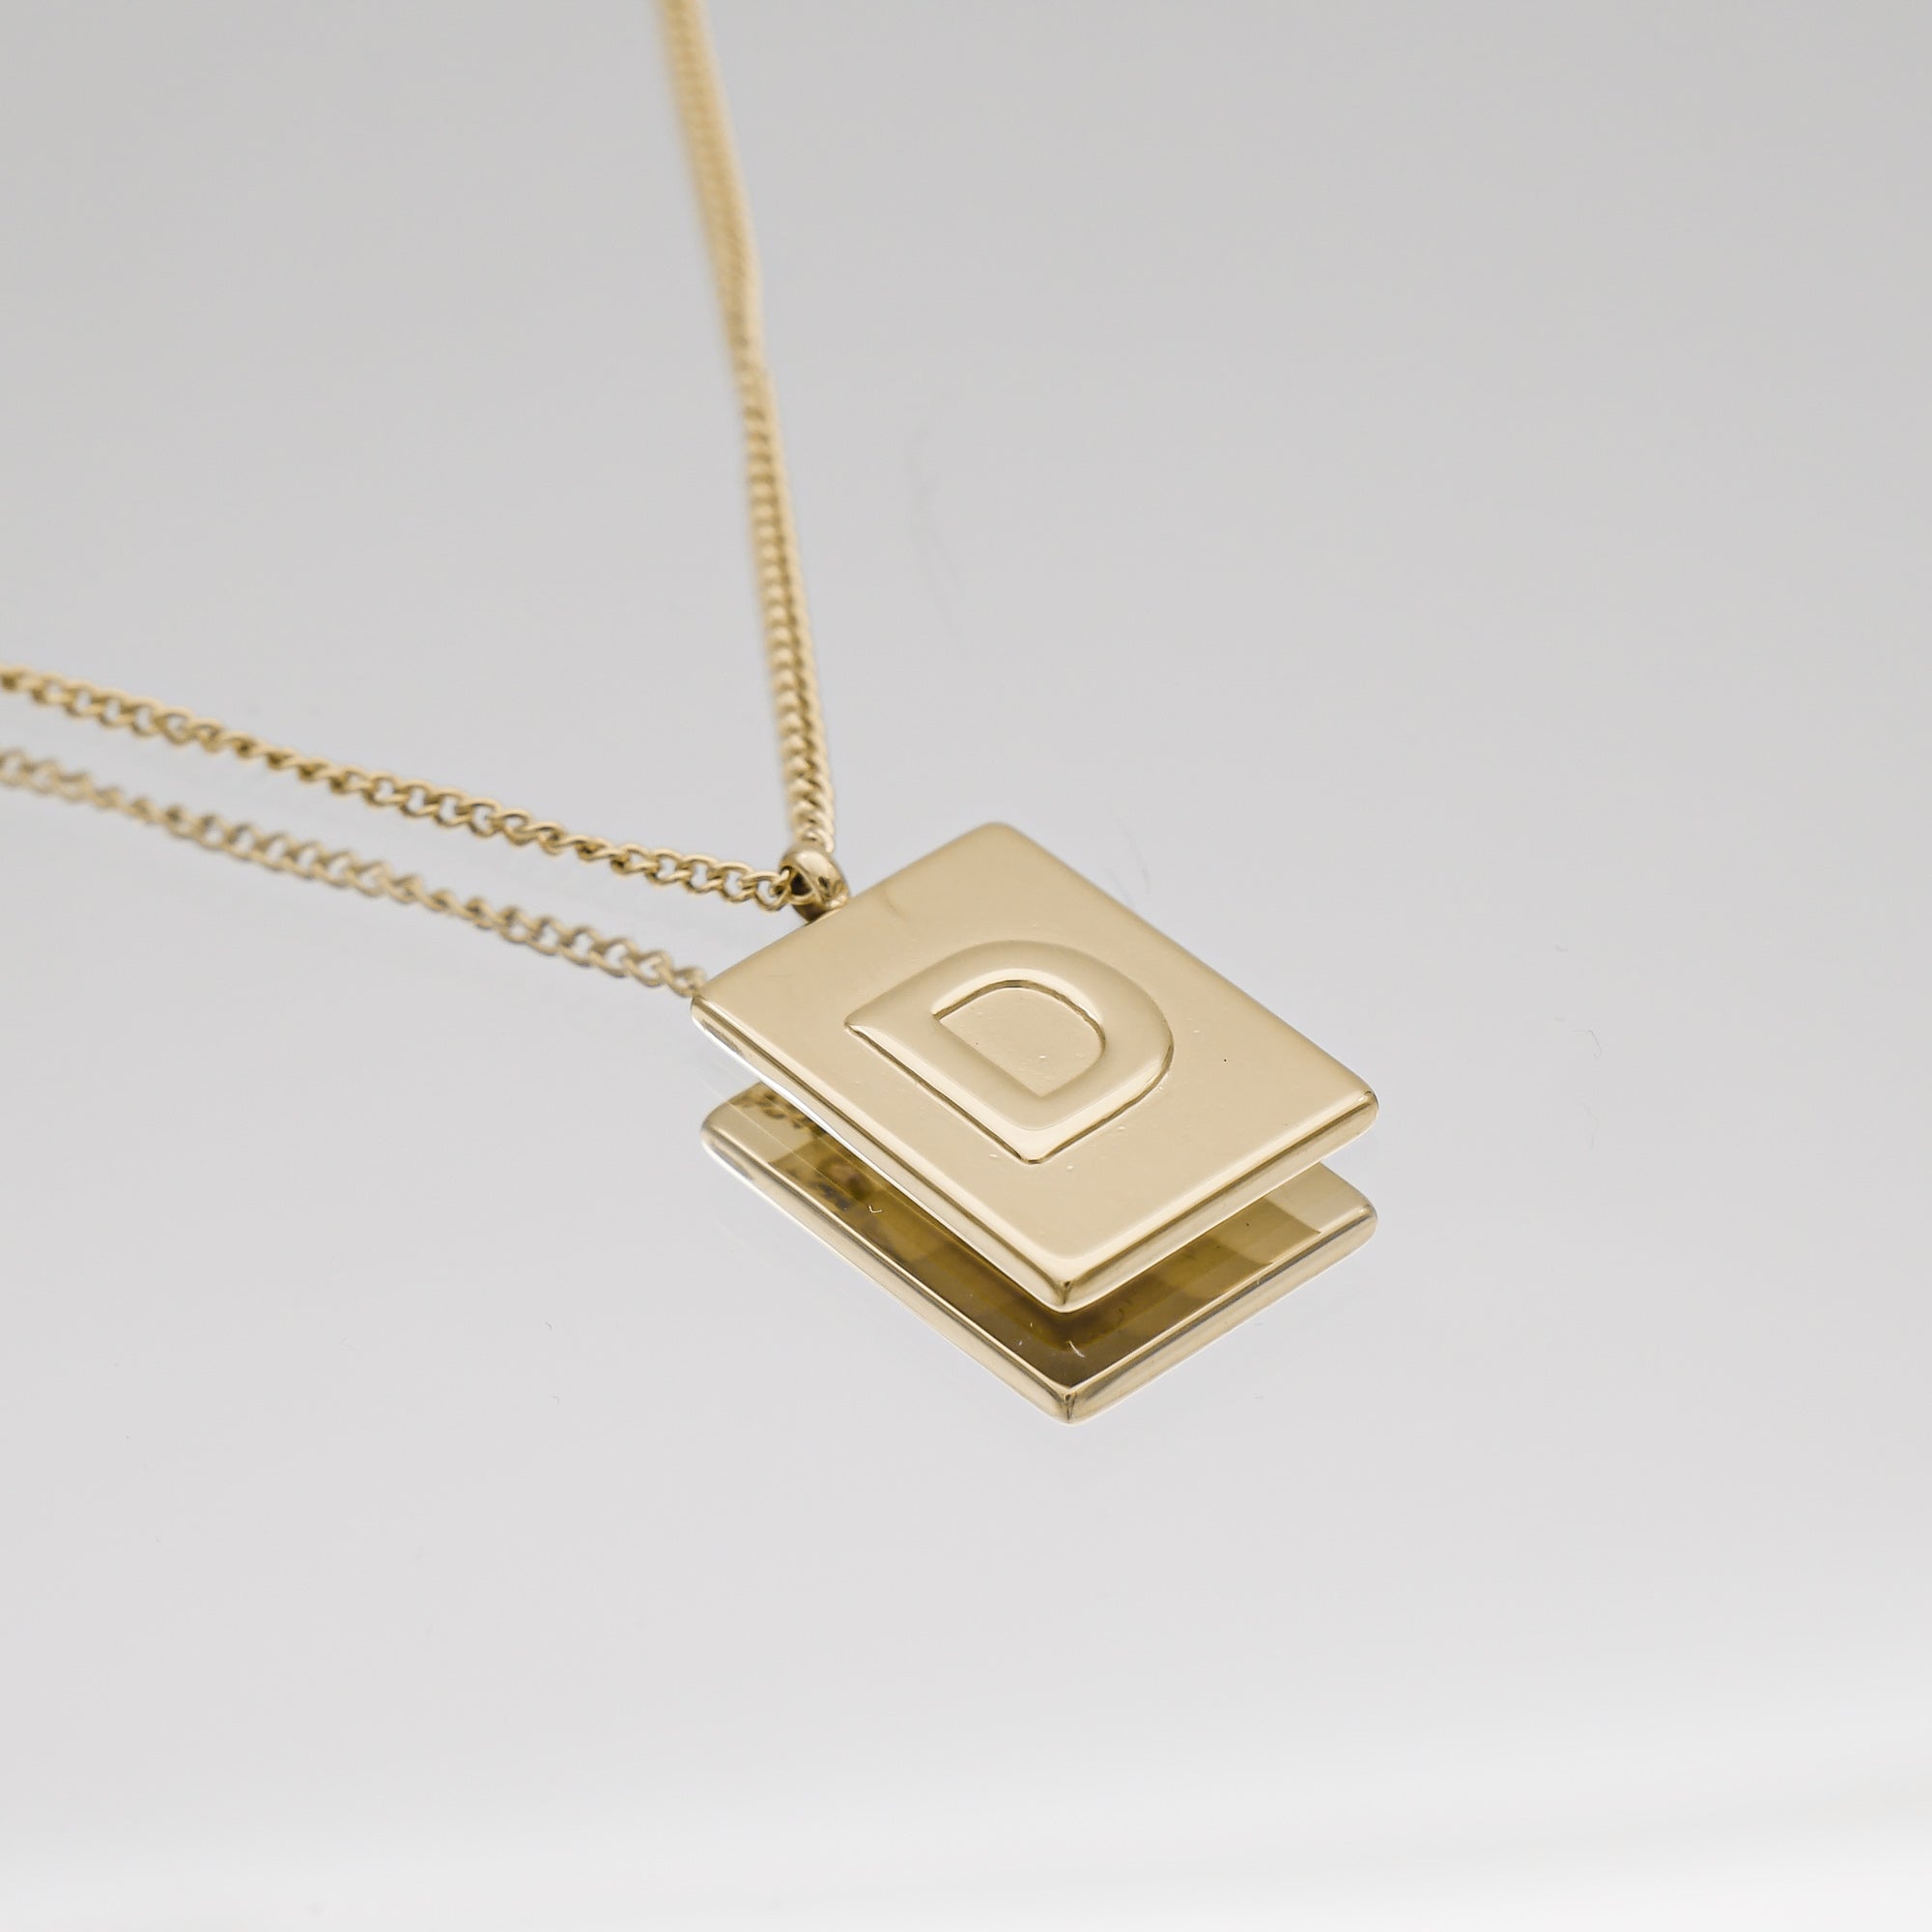 Athena custom initial Gold pendant Necklace, letter D by PRYA